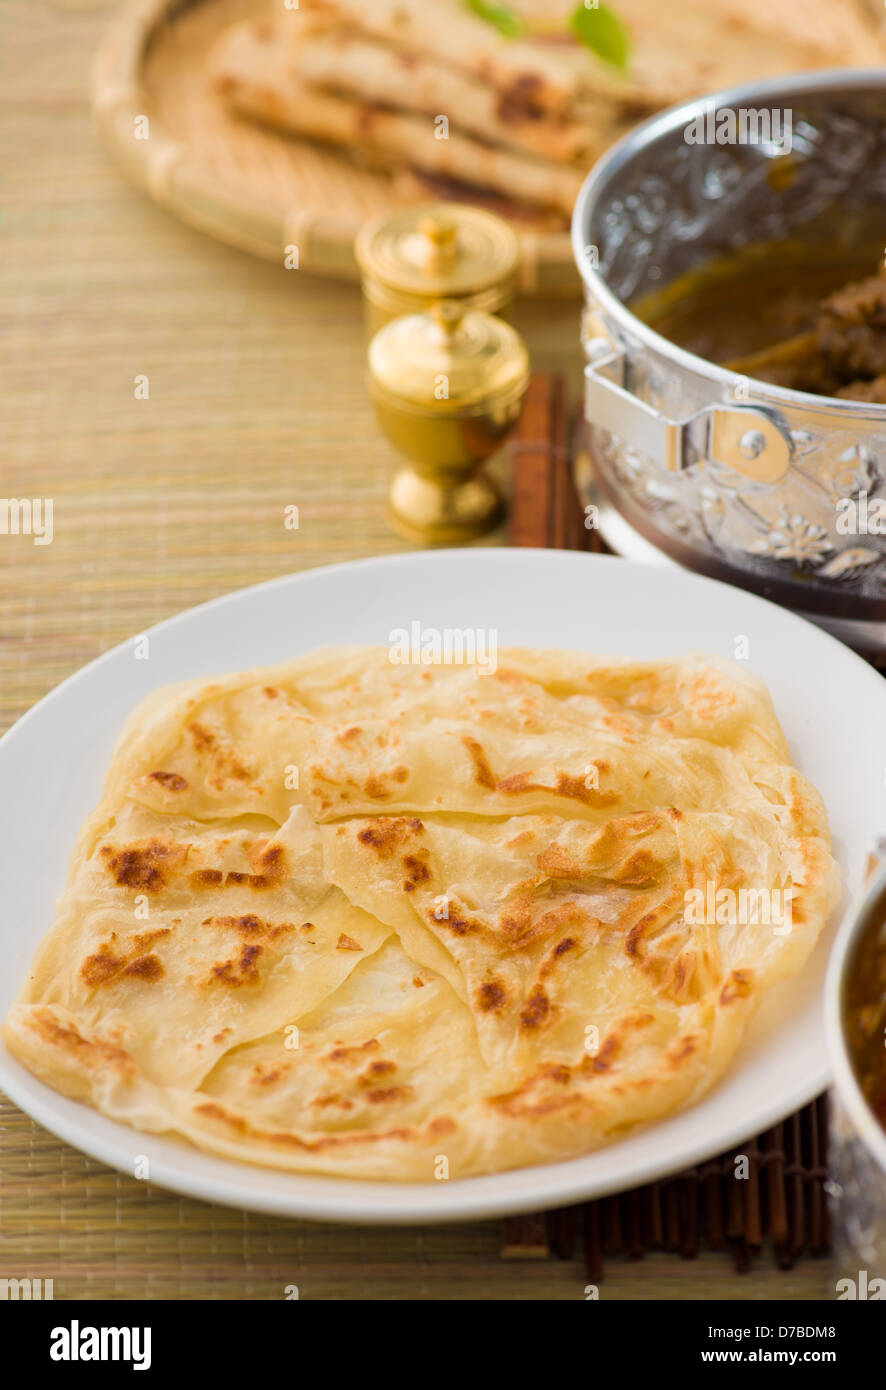 roti canai flat bread, very famous mamak food in malaysia, usually served wtih curry sambal or sugar Stock Photo